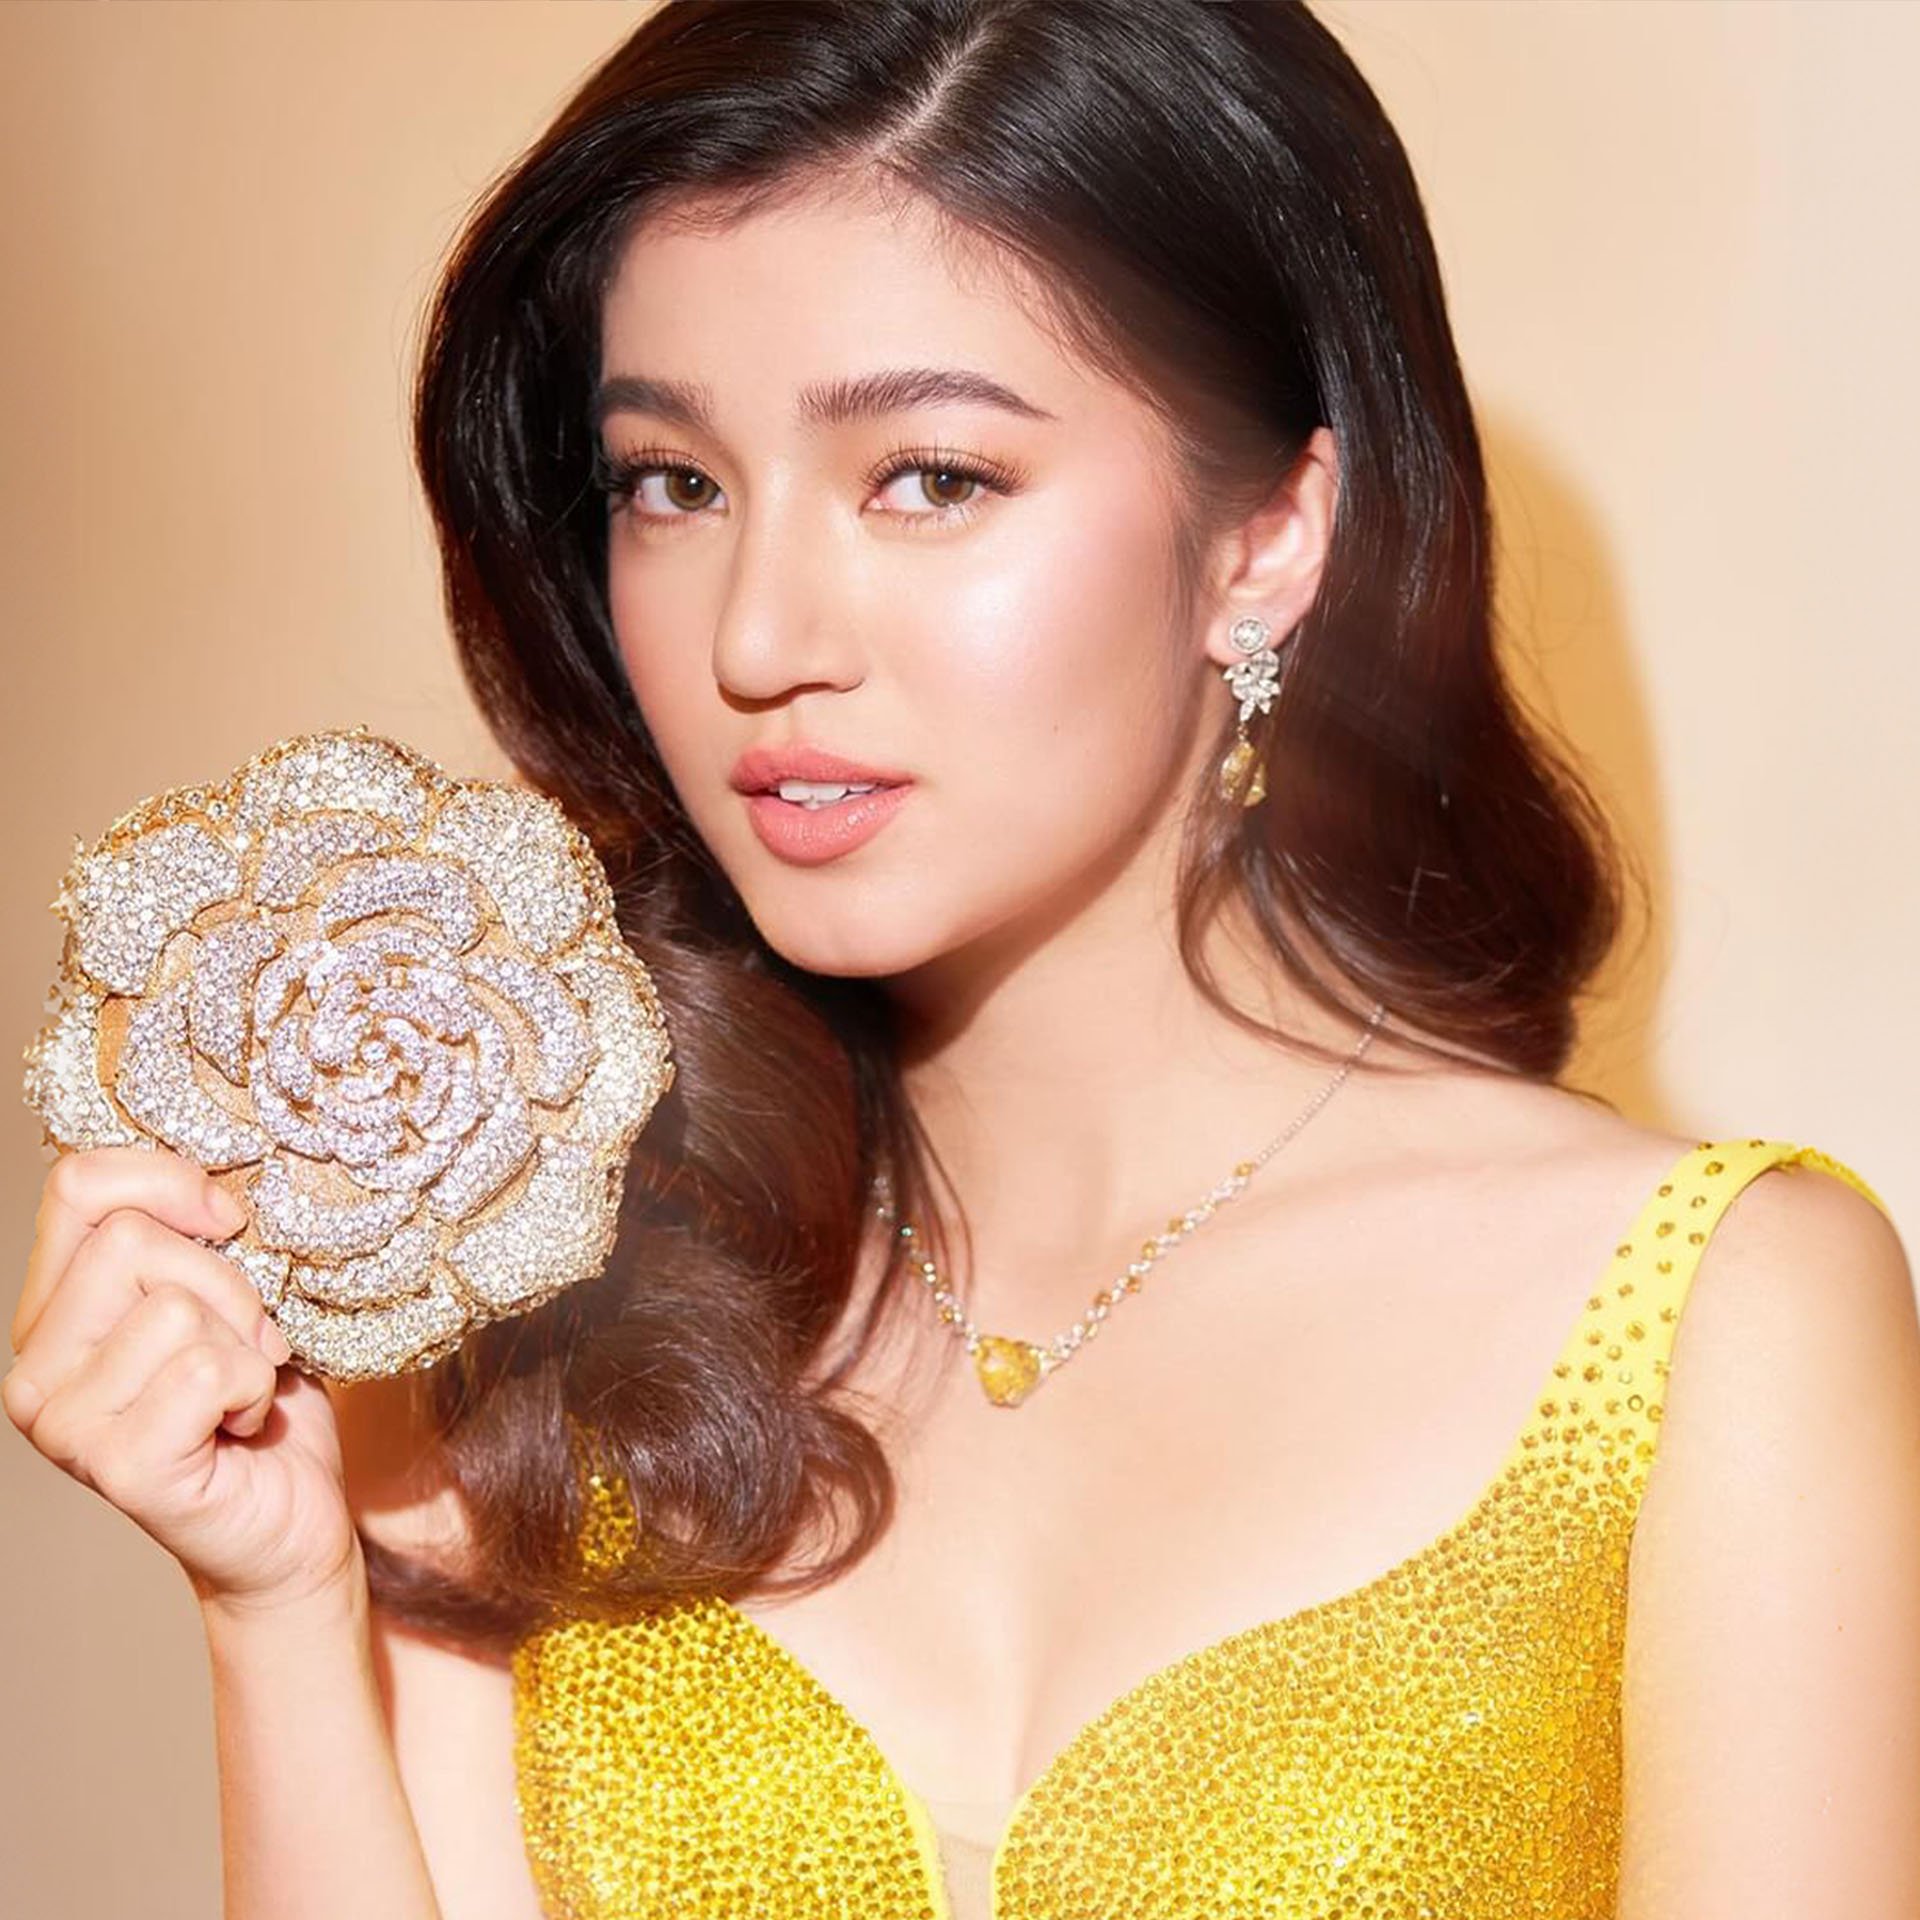 EXCLUSIVE: Belle Mariano Barely Wore Any Makeup at the Star Magical Prom